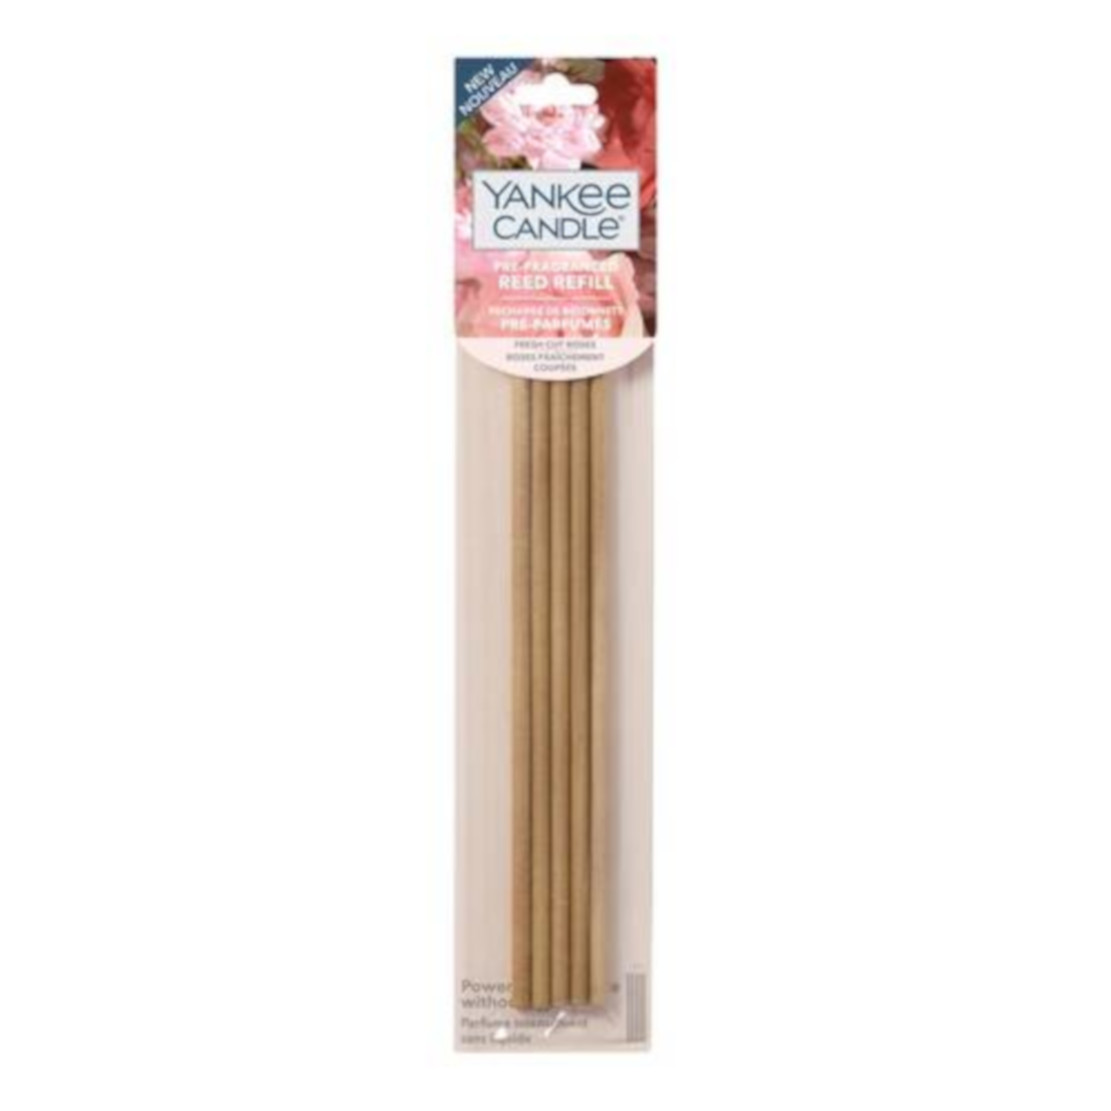 Yankee Candle Fresh Cut Roses Pre-Fragranced Reed Diffuser Refills